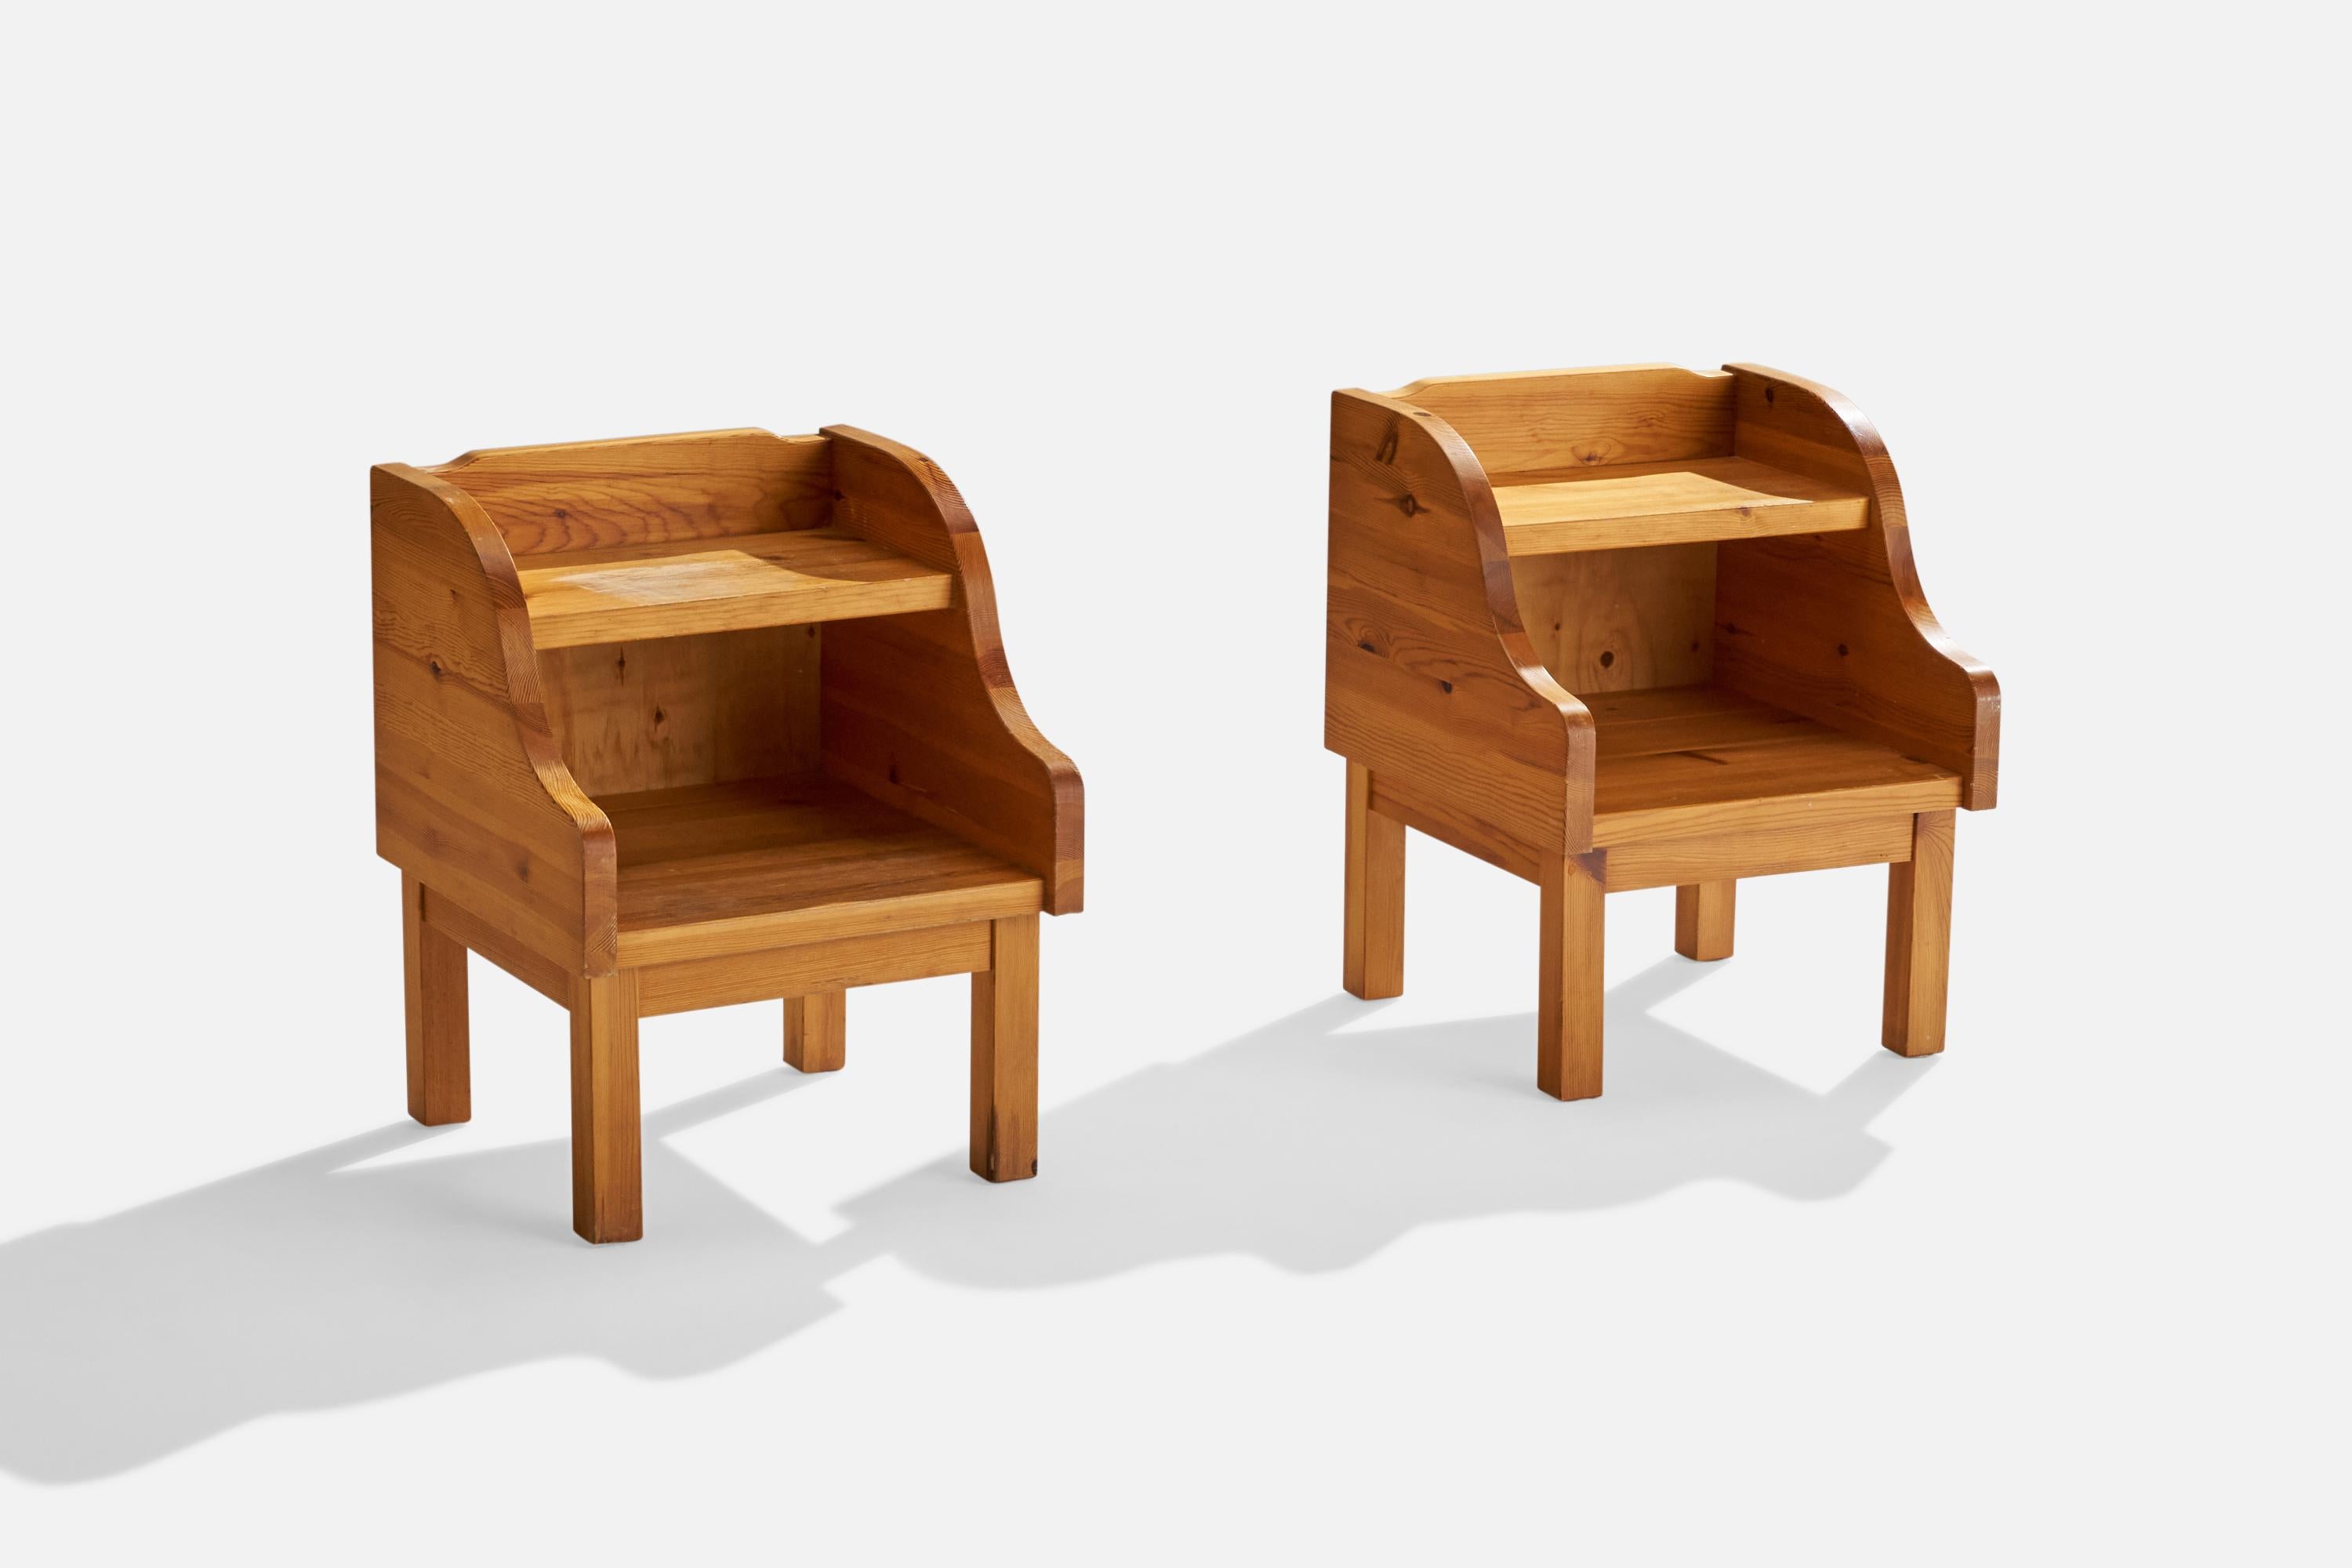 A pair of pine nightstands designed and produced in Sweden, c. 1970s.